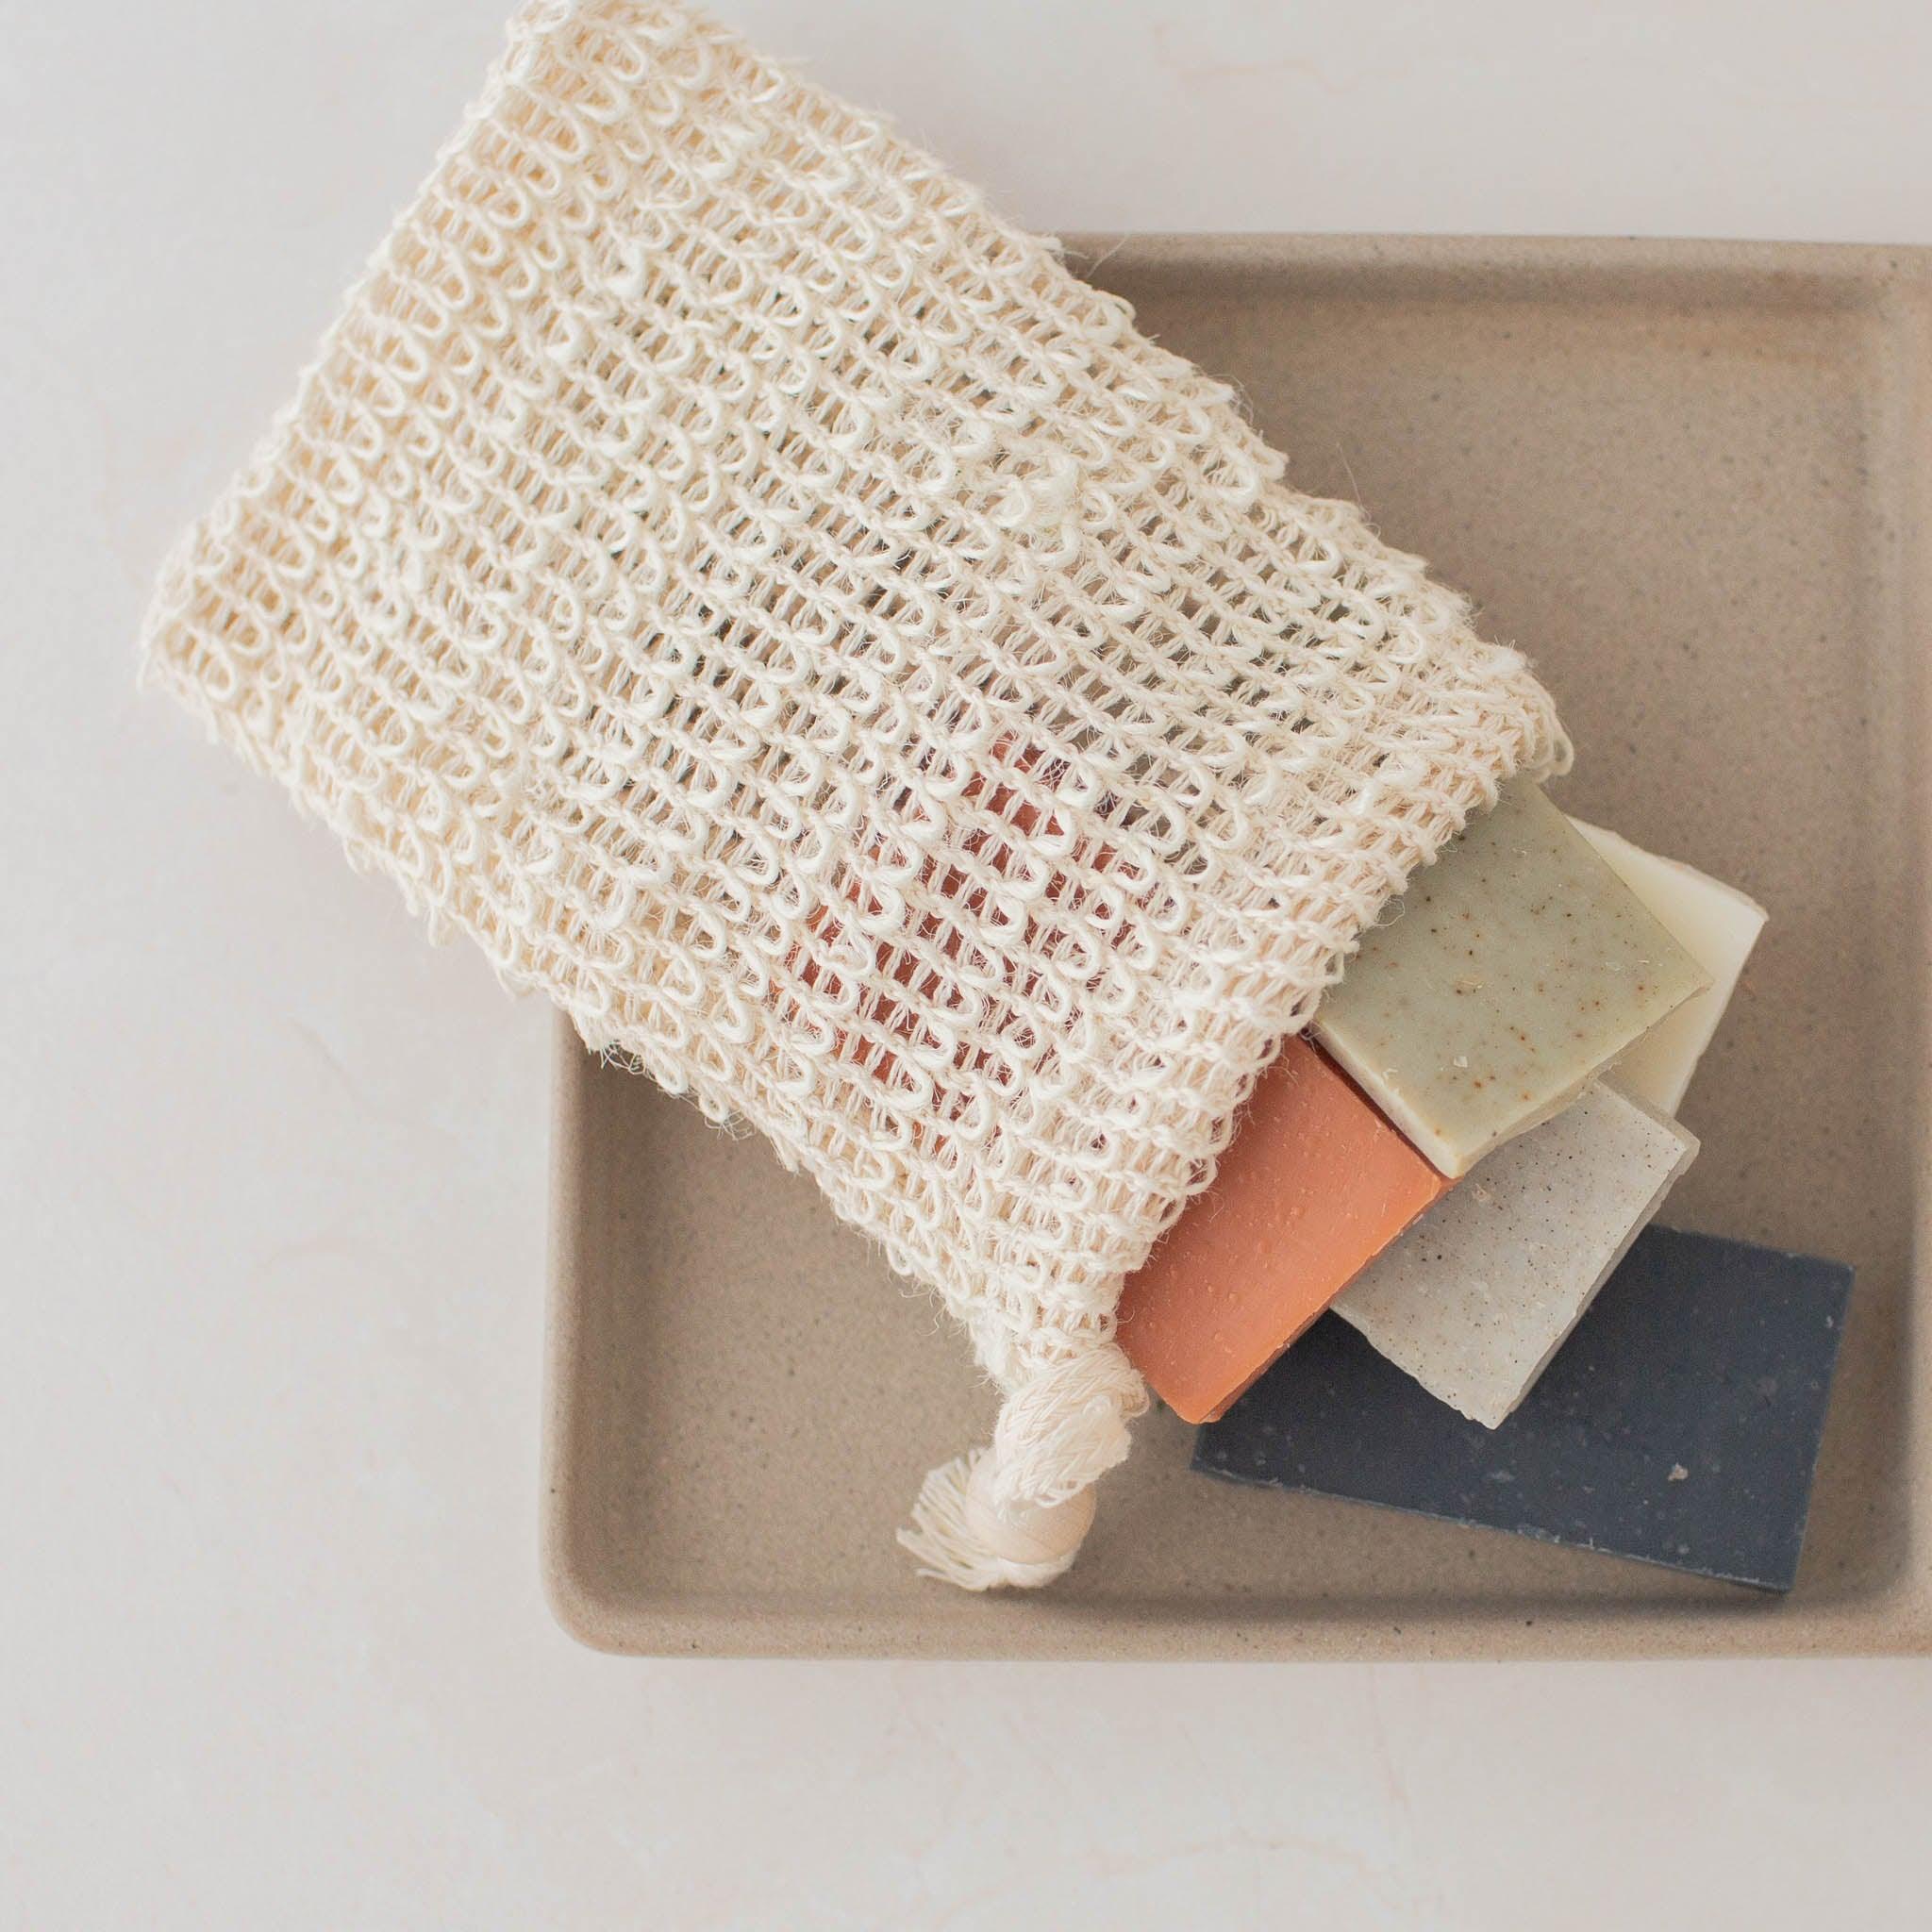 Compostable white woven sisal soap saver bag with soap inside.